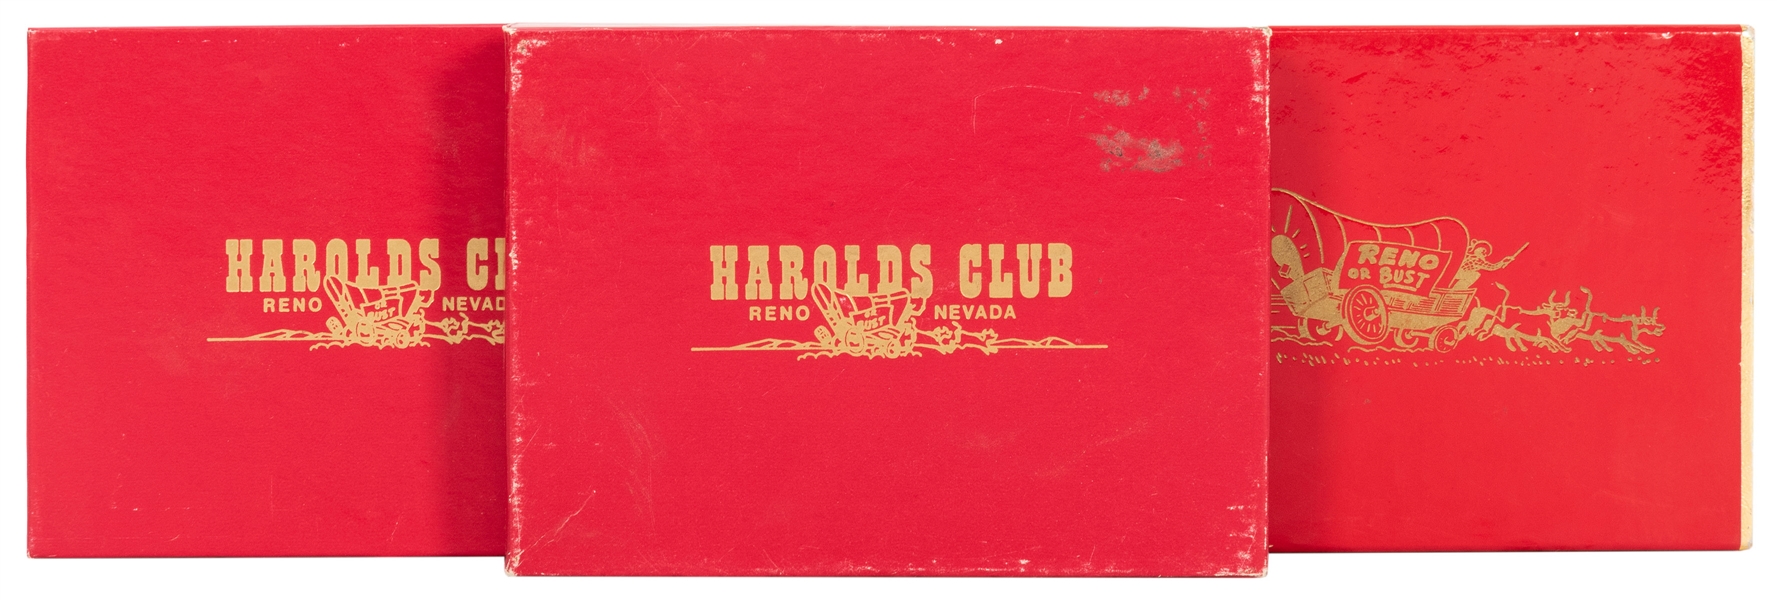  Harold’s Club Casino Playing Cards. Three vintage double-de...